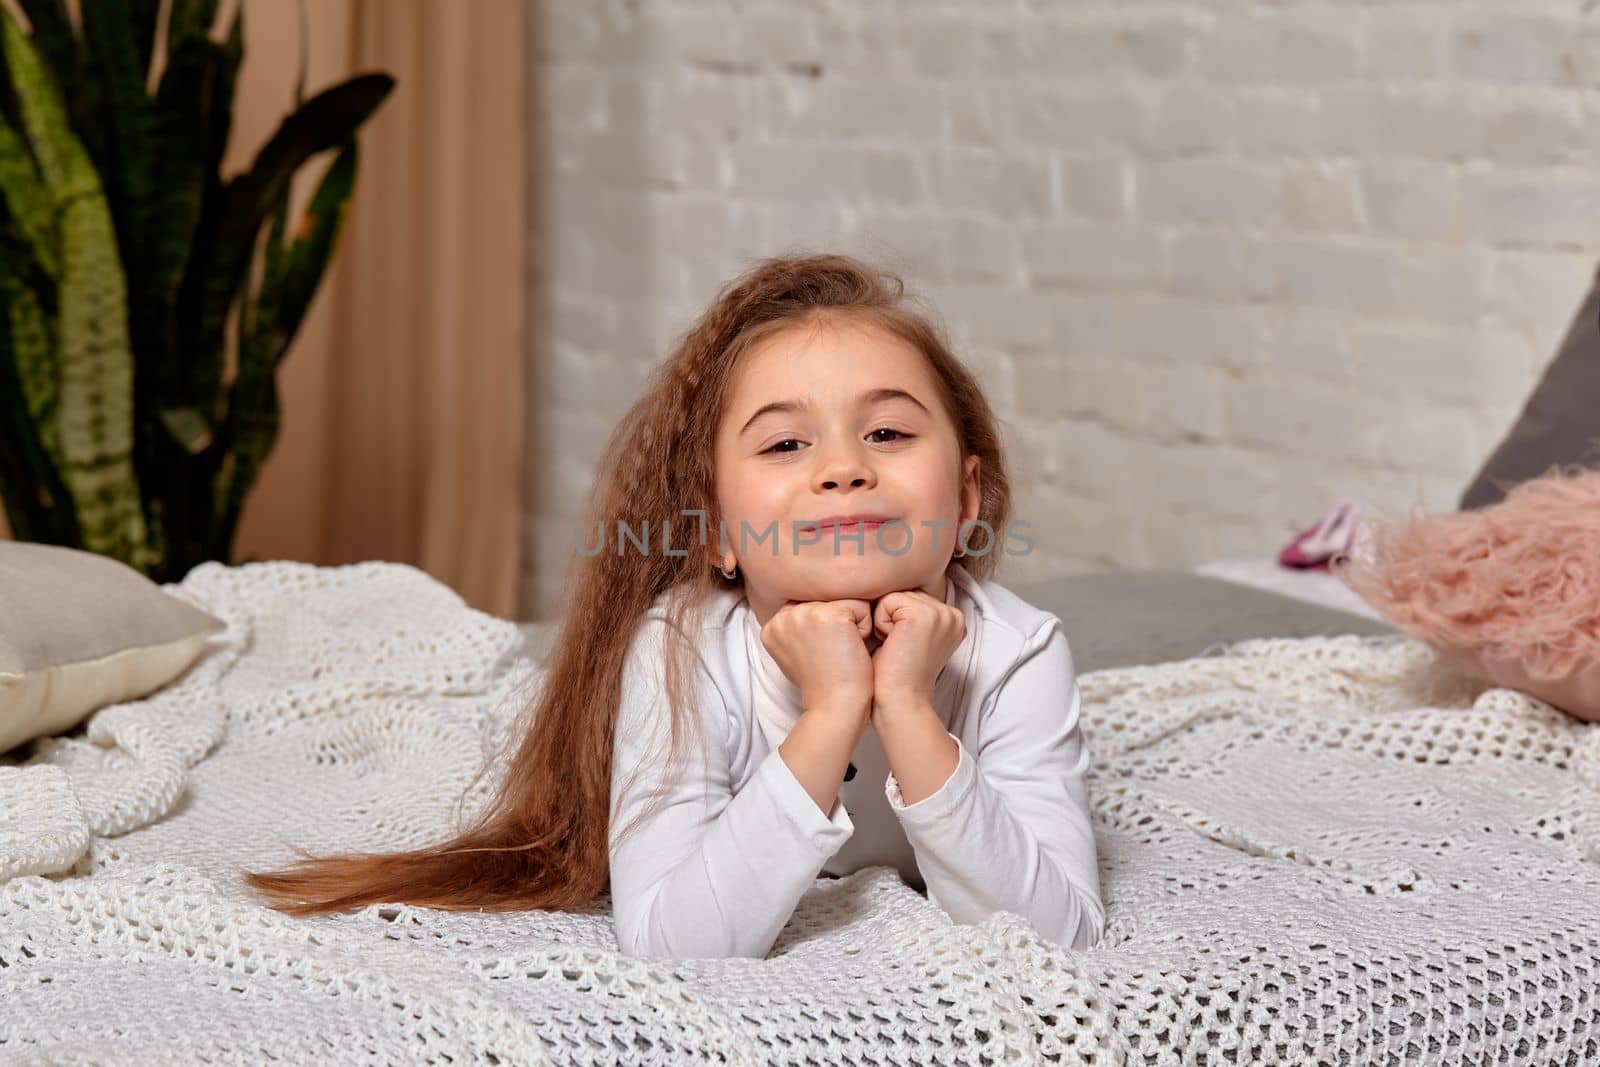 A little girl lies on the bed in the room. She posing before camera and looks happy